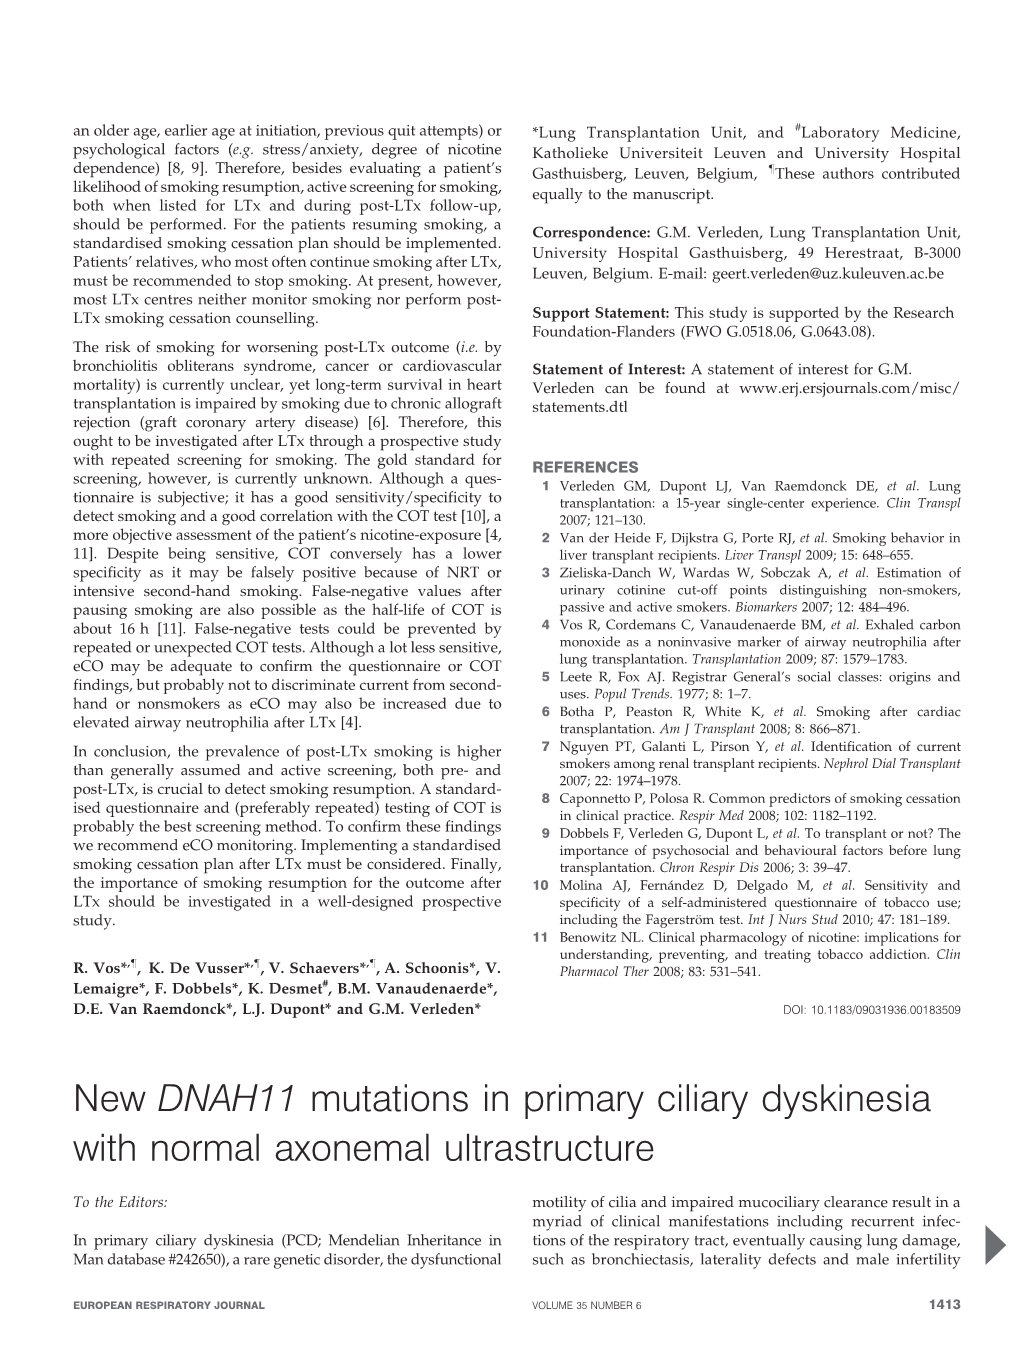 New DNAH11 Mutations in Primary Ciliary Dyskinesia with Normal Axonemal Ultrastructure